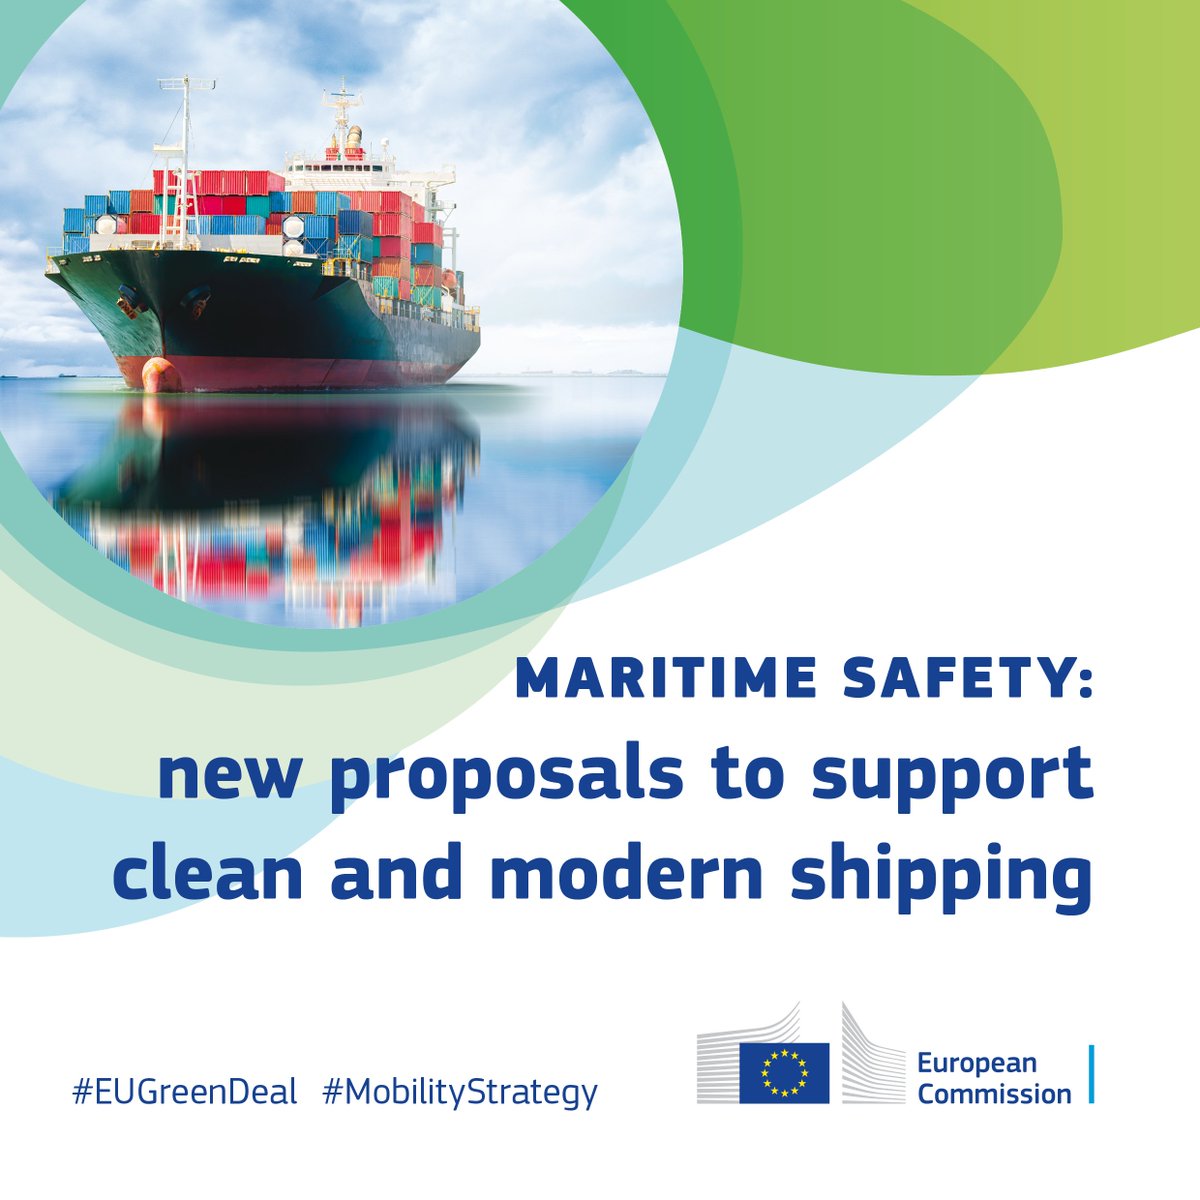 EU_ENV: RT @Transport_EU: 📢 Just adopted - 5 🆕 maritime transport proposals:

🌊modernising EU rules on maritime safety
🌊preventing sea pollution from ships

👉 Find all the info here: europa.eu/!PWgXgJ

#MobilityStrategy #EUGreenDeal